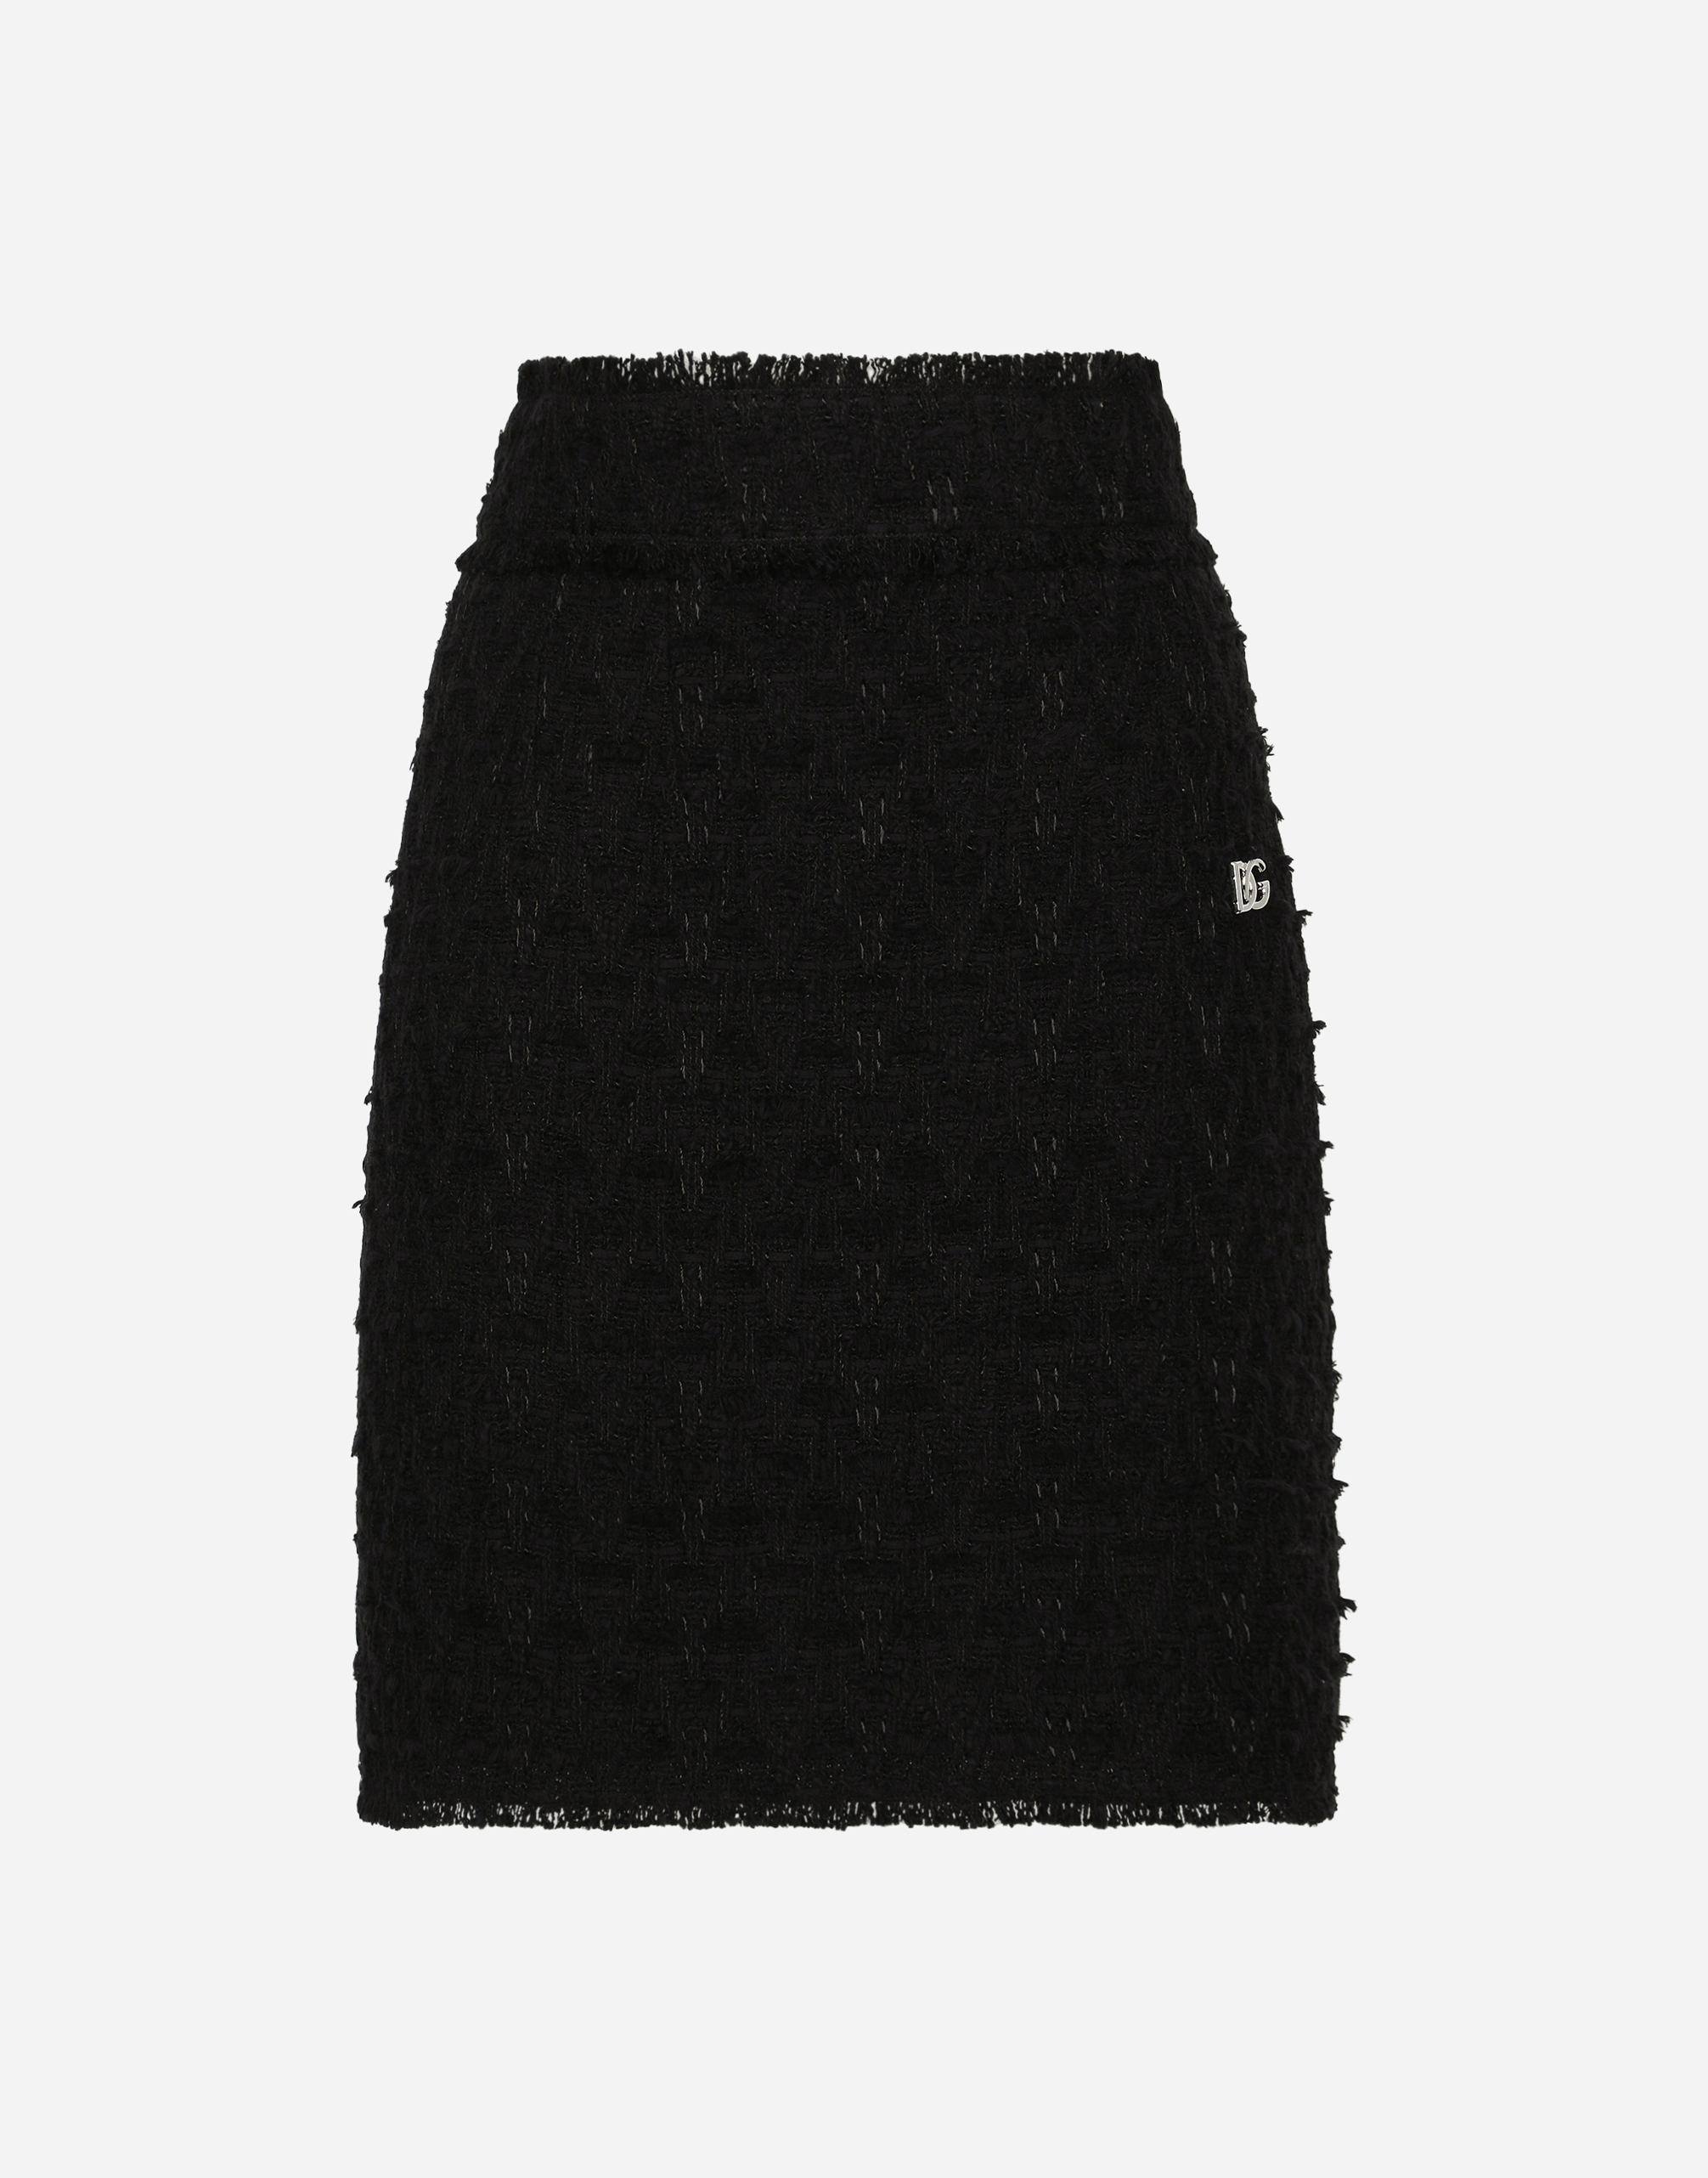 Rush-stitch skirt with side slit in Black